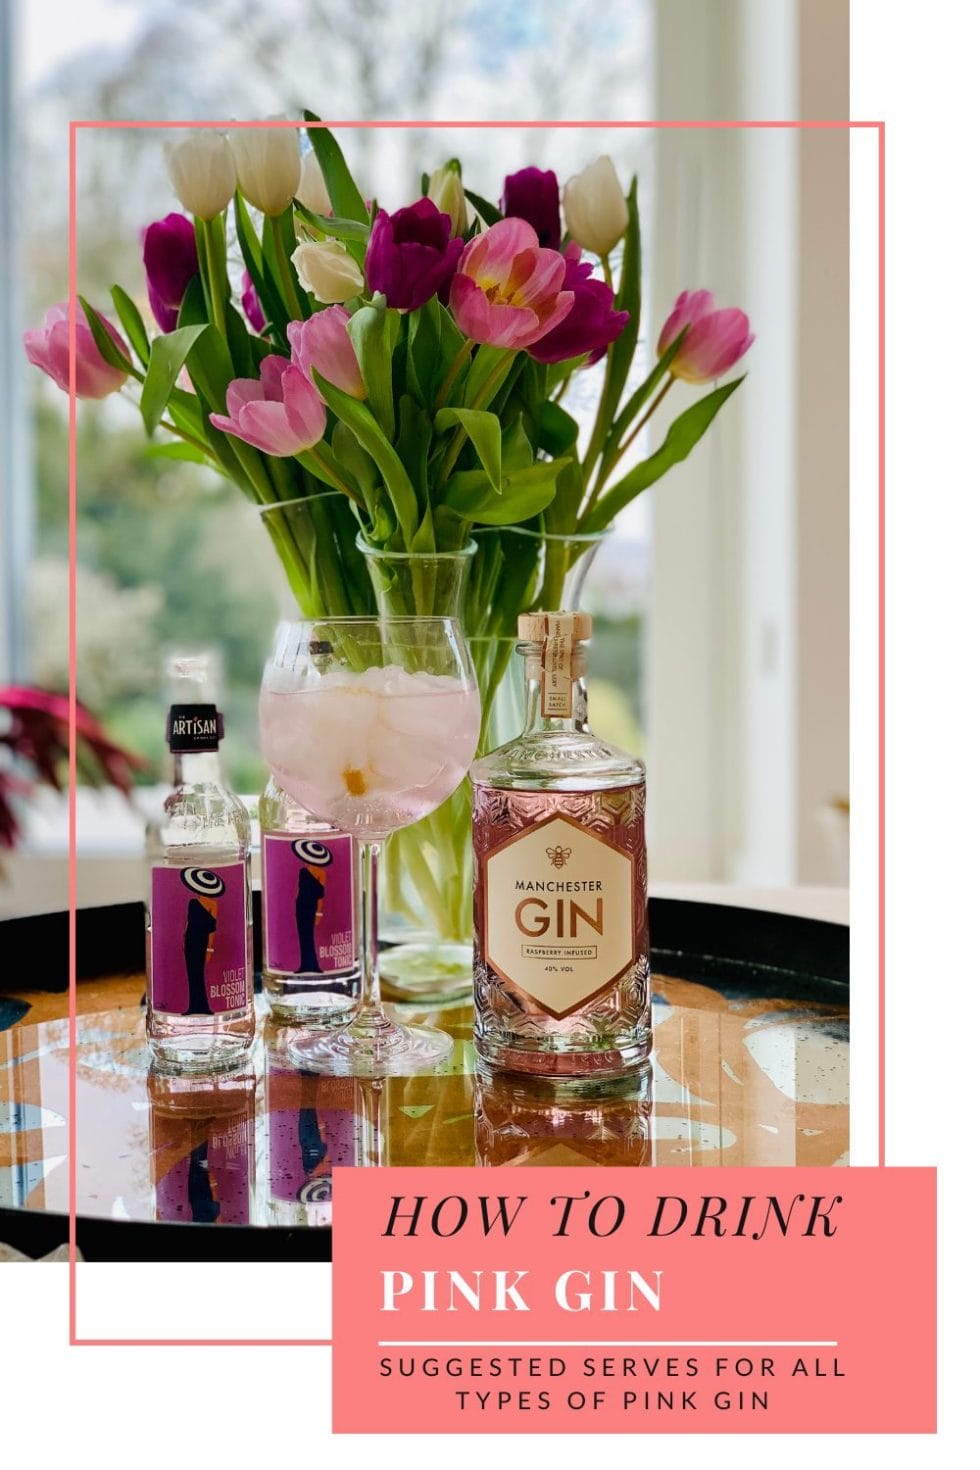 How to serve pink gin